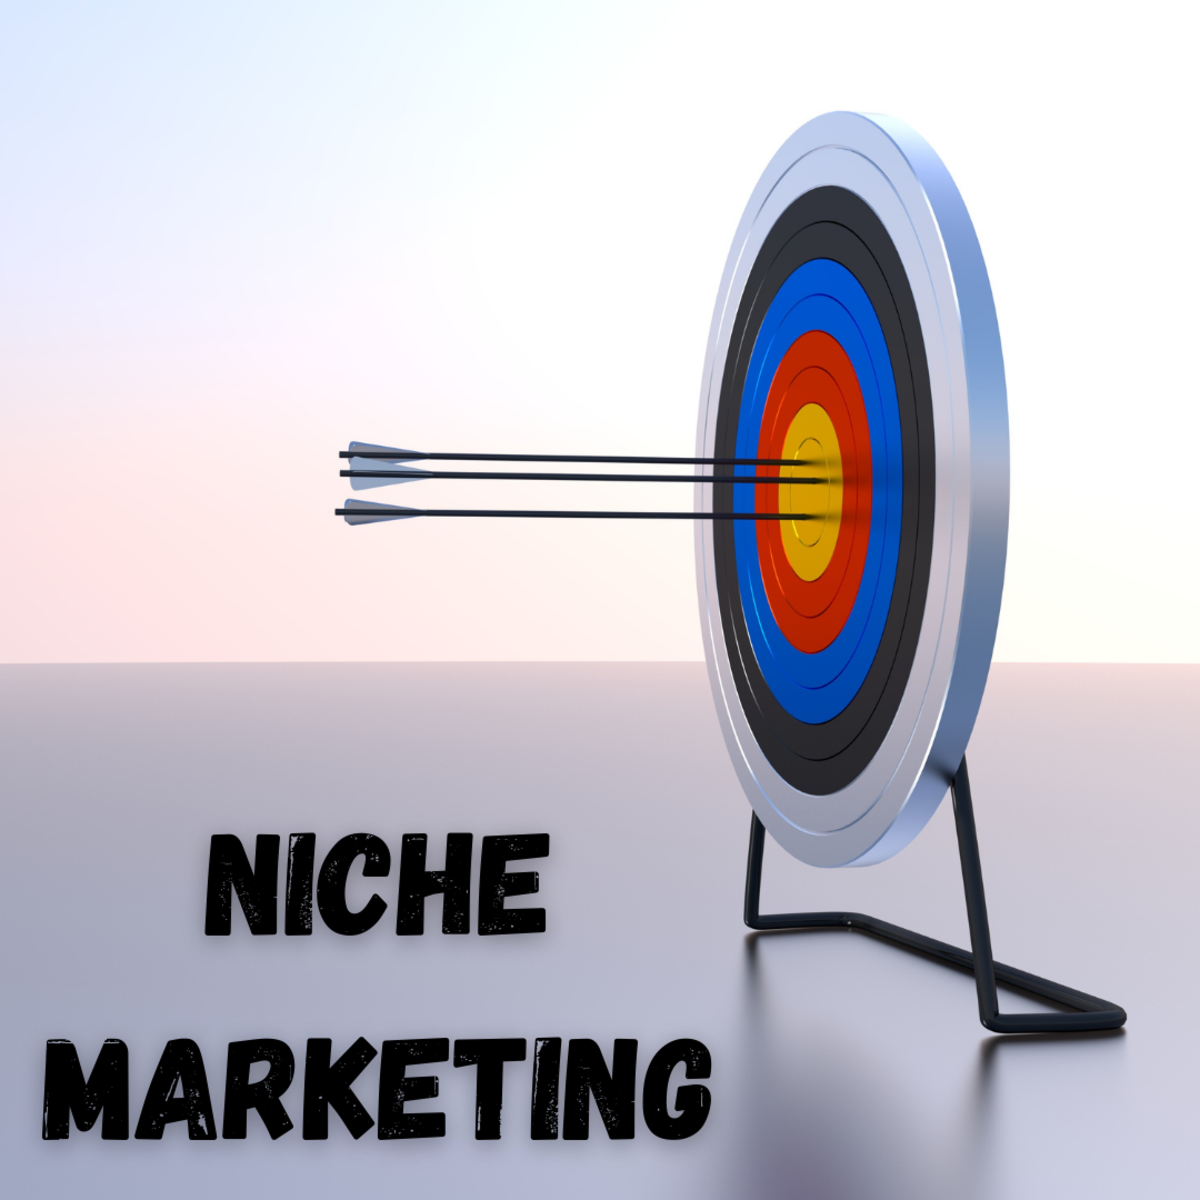 Concept Of Niche Marketing Every Business Should Consider